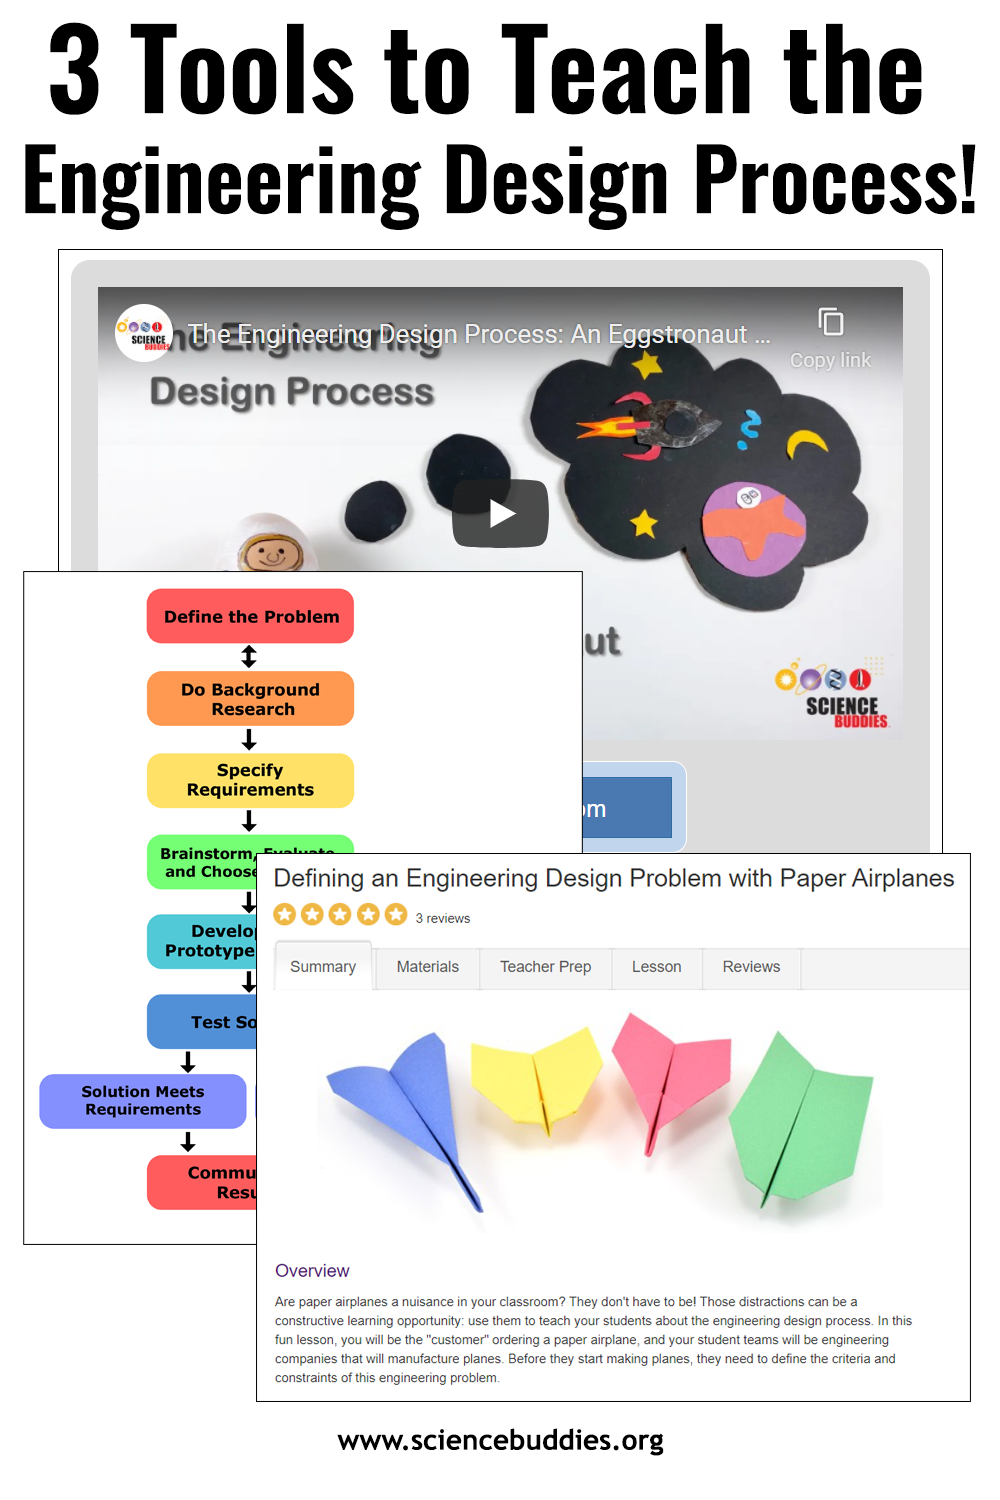 Engineering design process video, Engineering design process project guide, and Engineering design process lessons - 3 ways to teach the Engineering design process to K-12 students